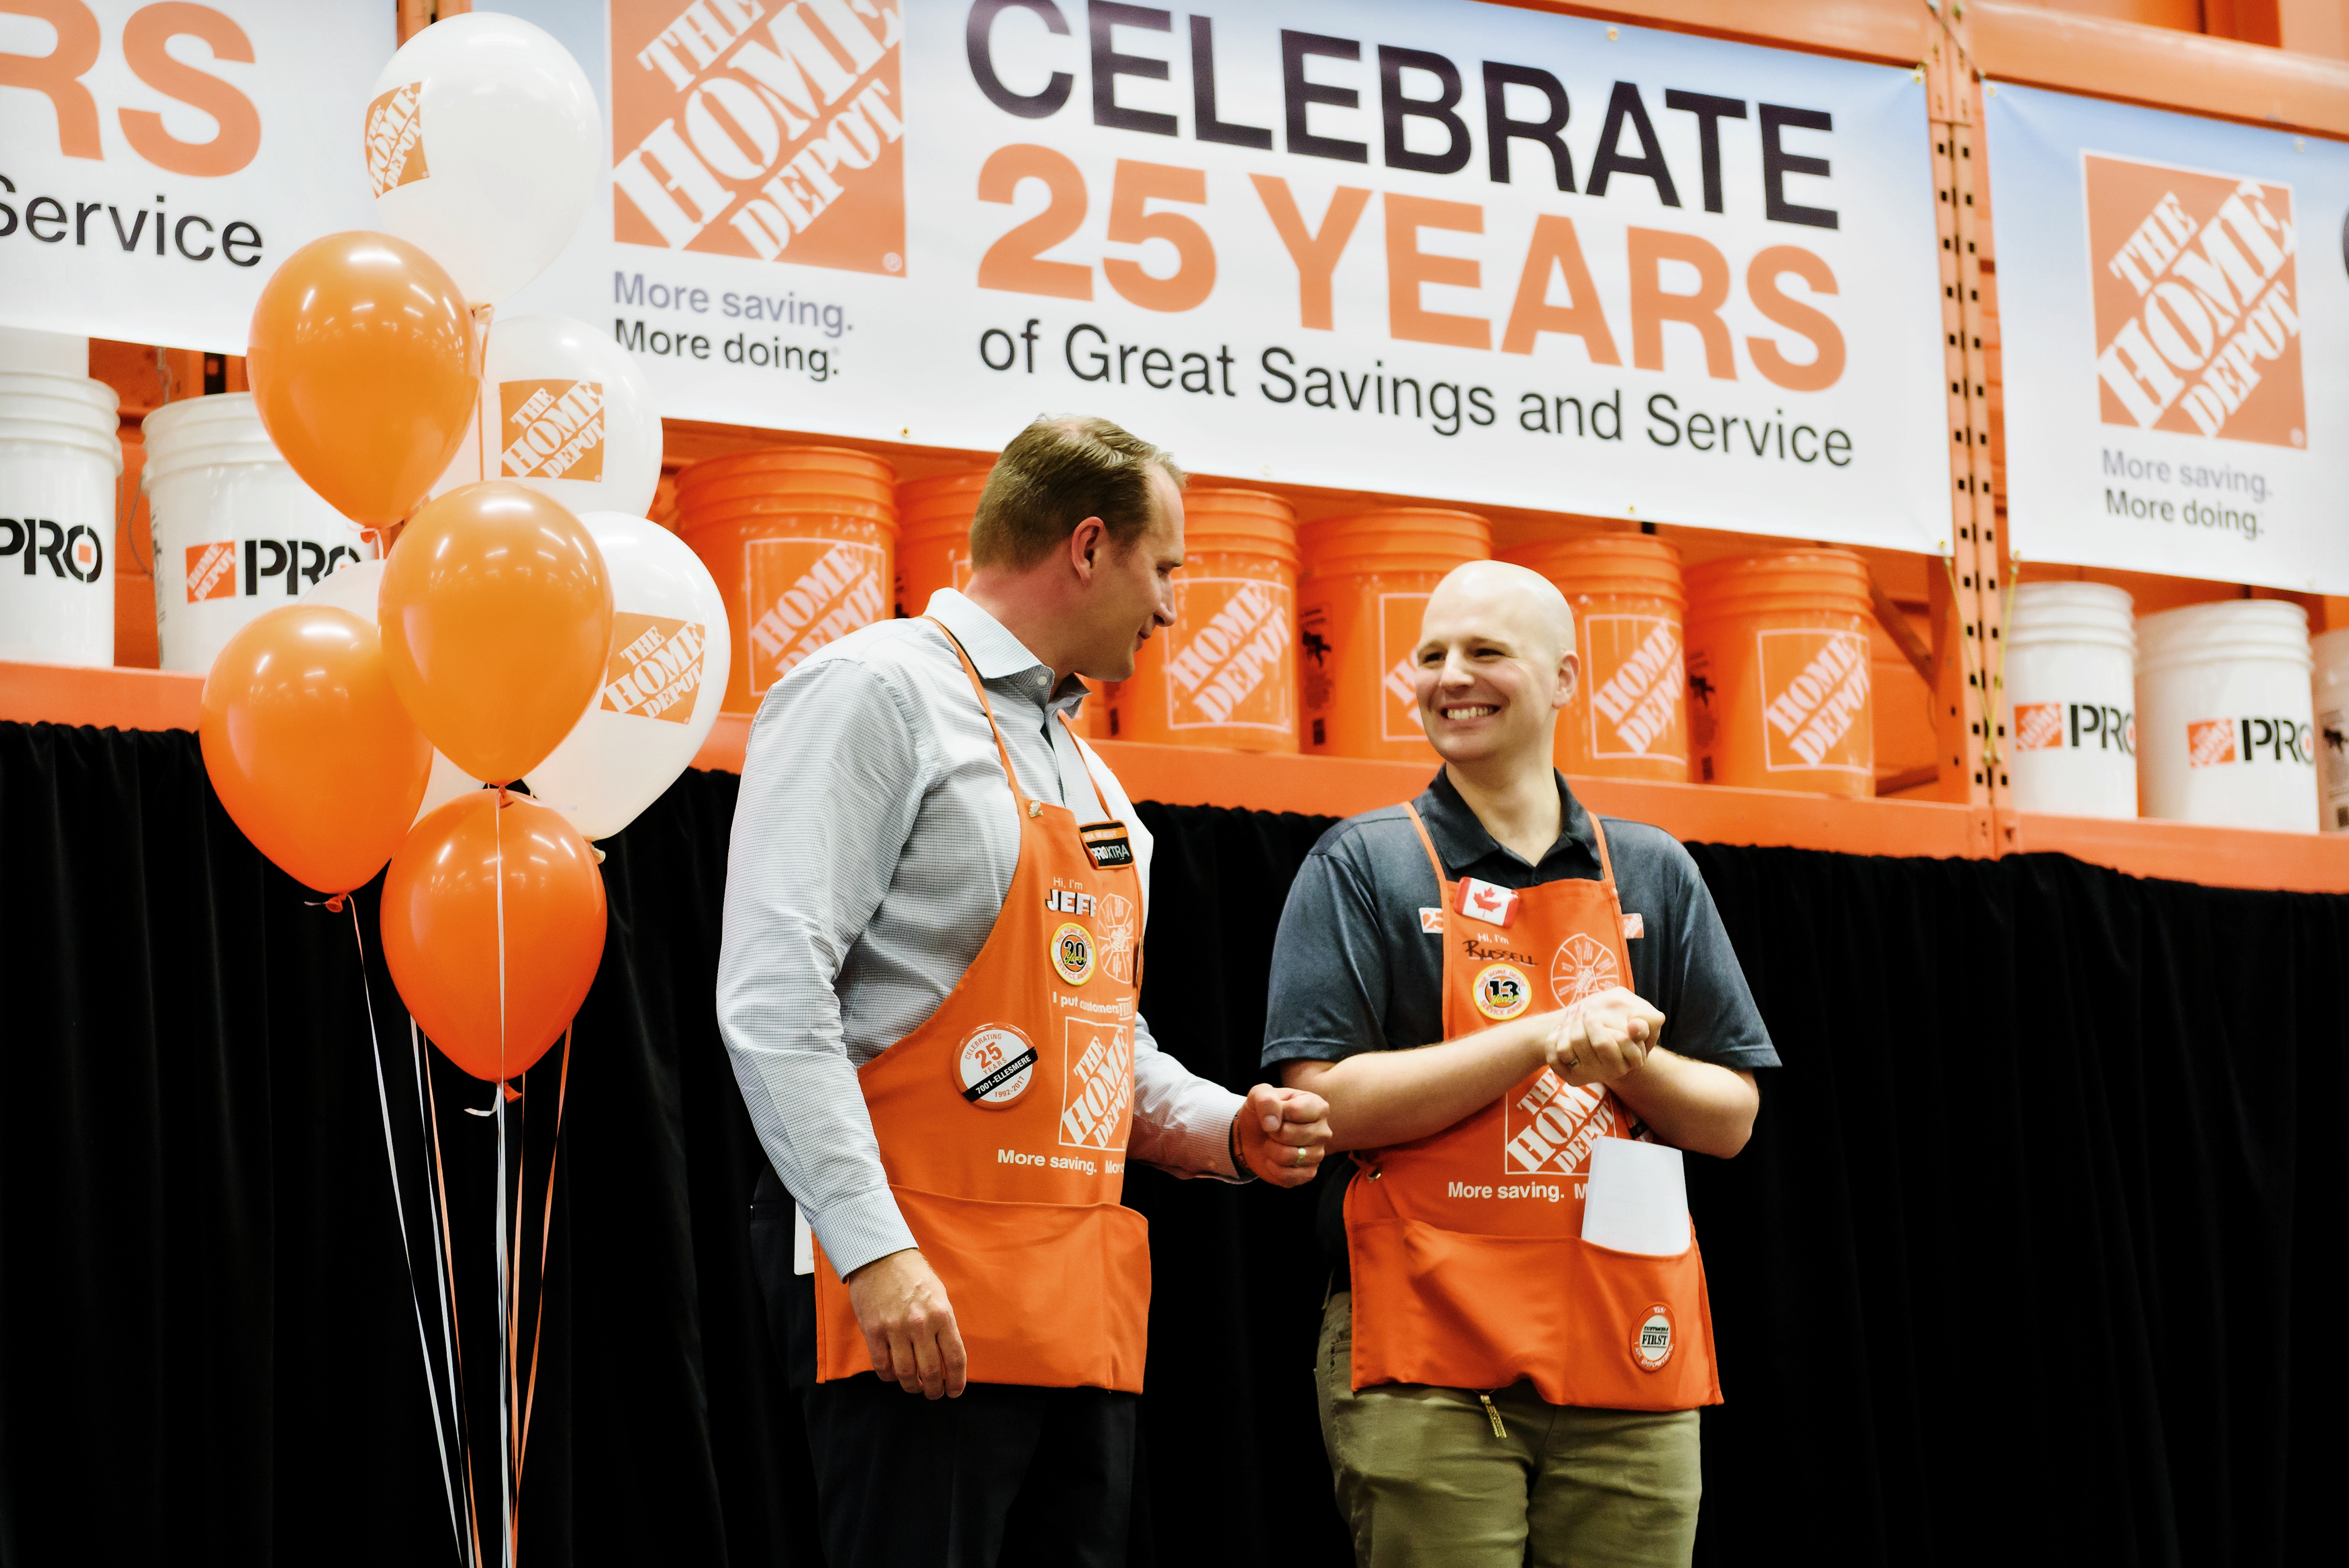 Home Depot marks 25 years in Canada | Hardlines